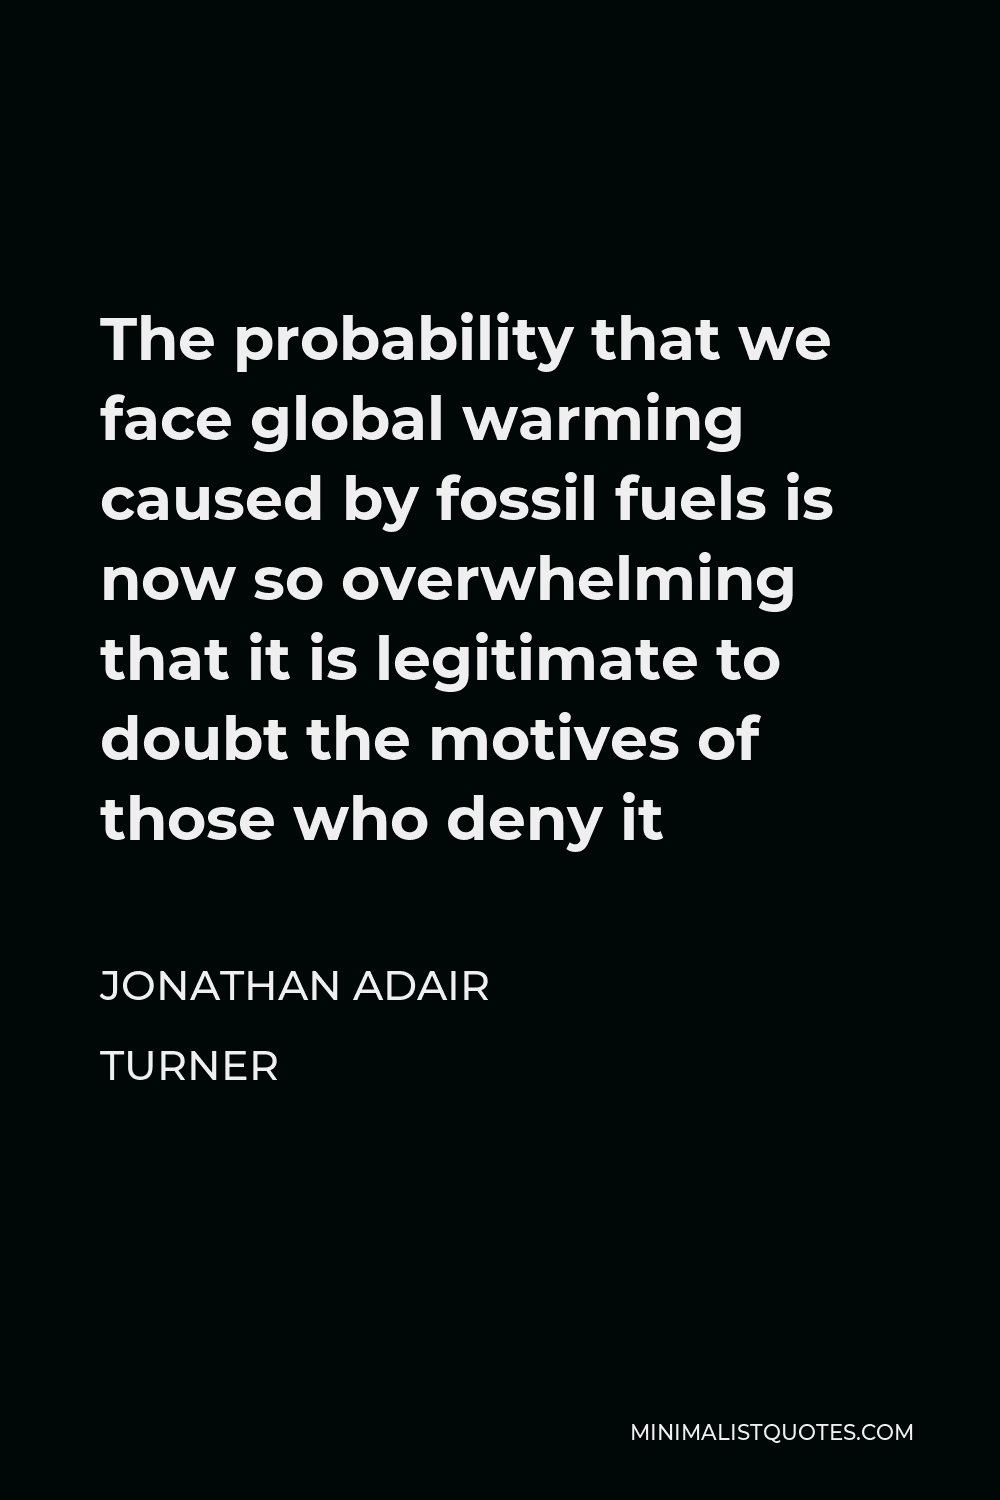 Jonathan Adair Turner Quote - The probability that we face global warming caused by fossil fuels is now so overwhelming that it is legitimate to doubt the motives of those who deny it